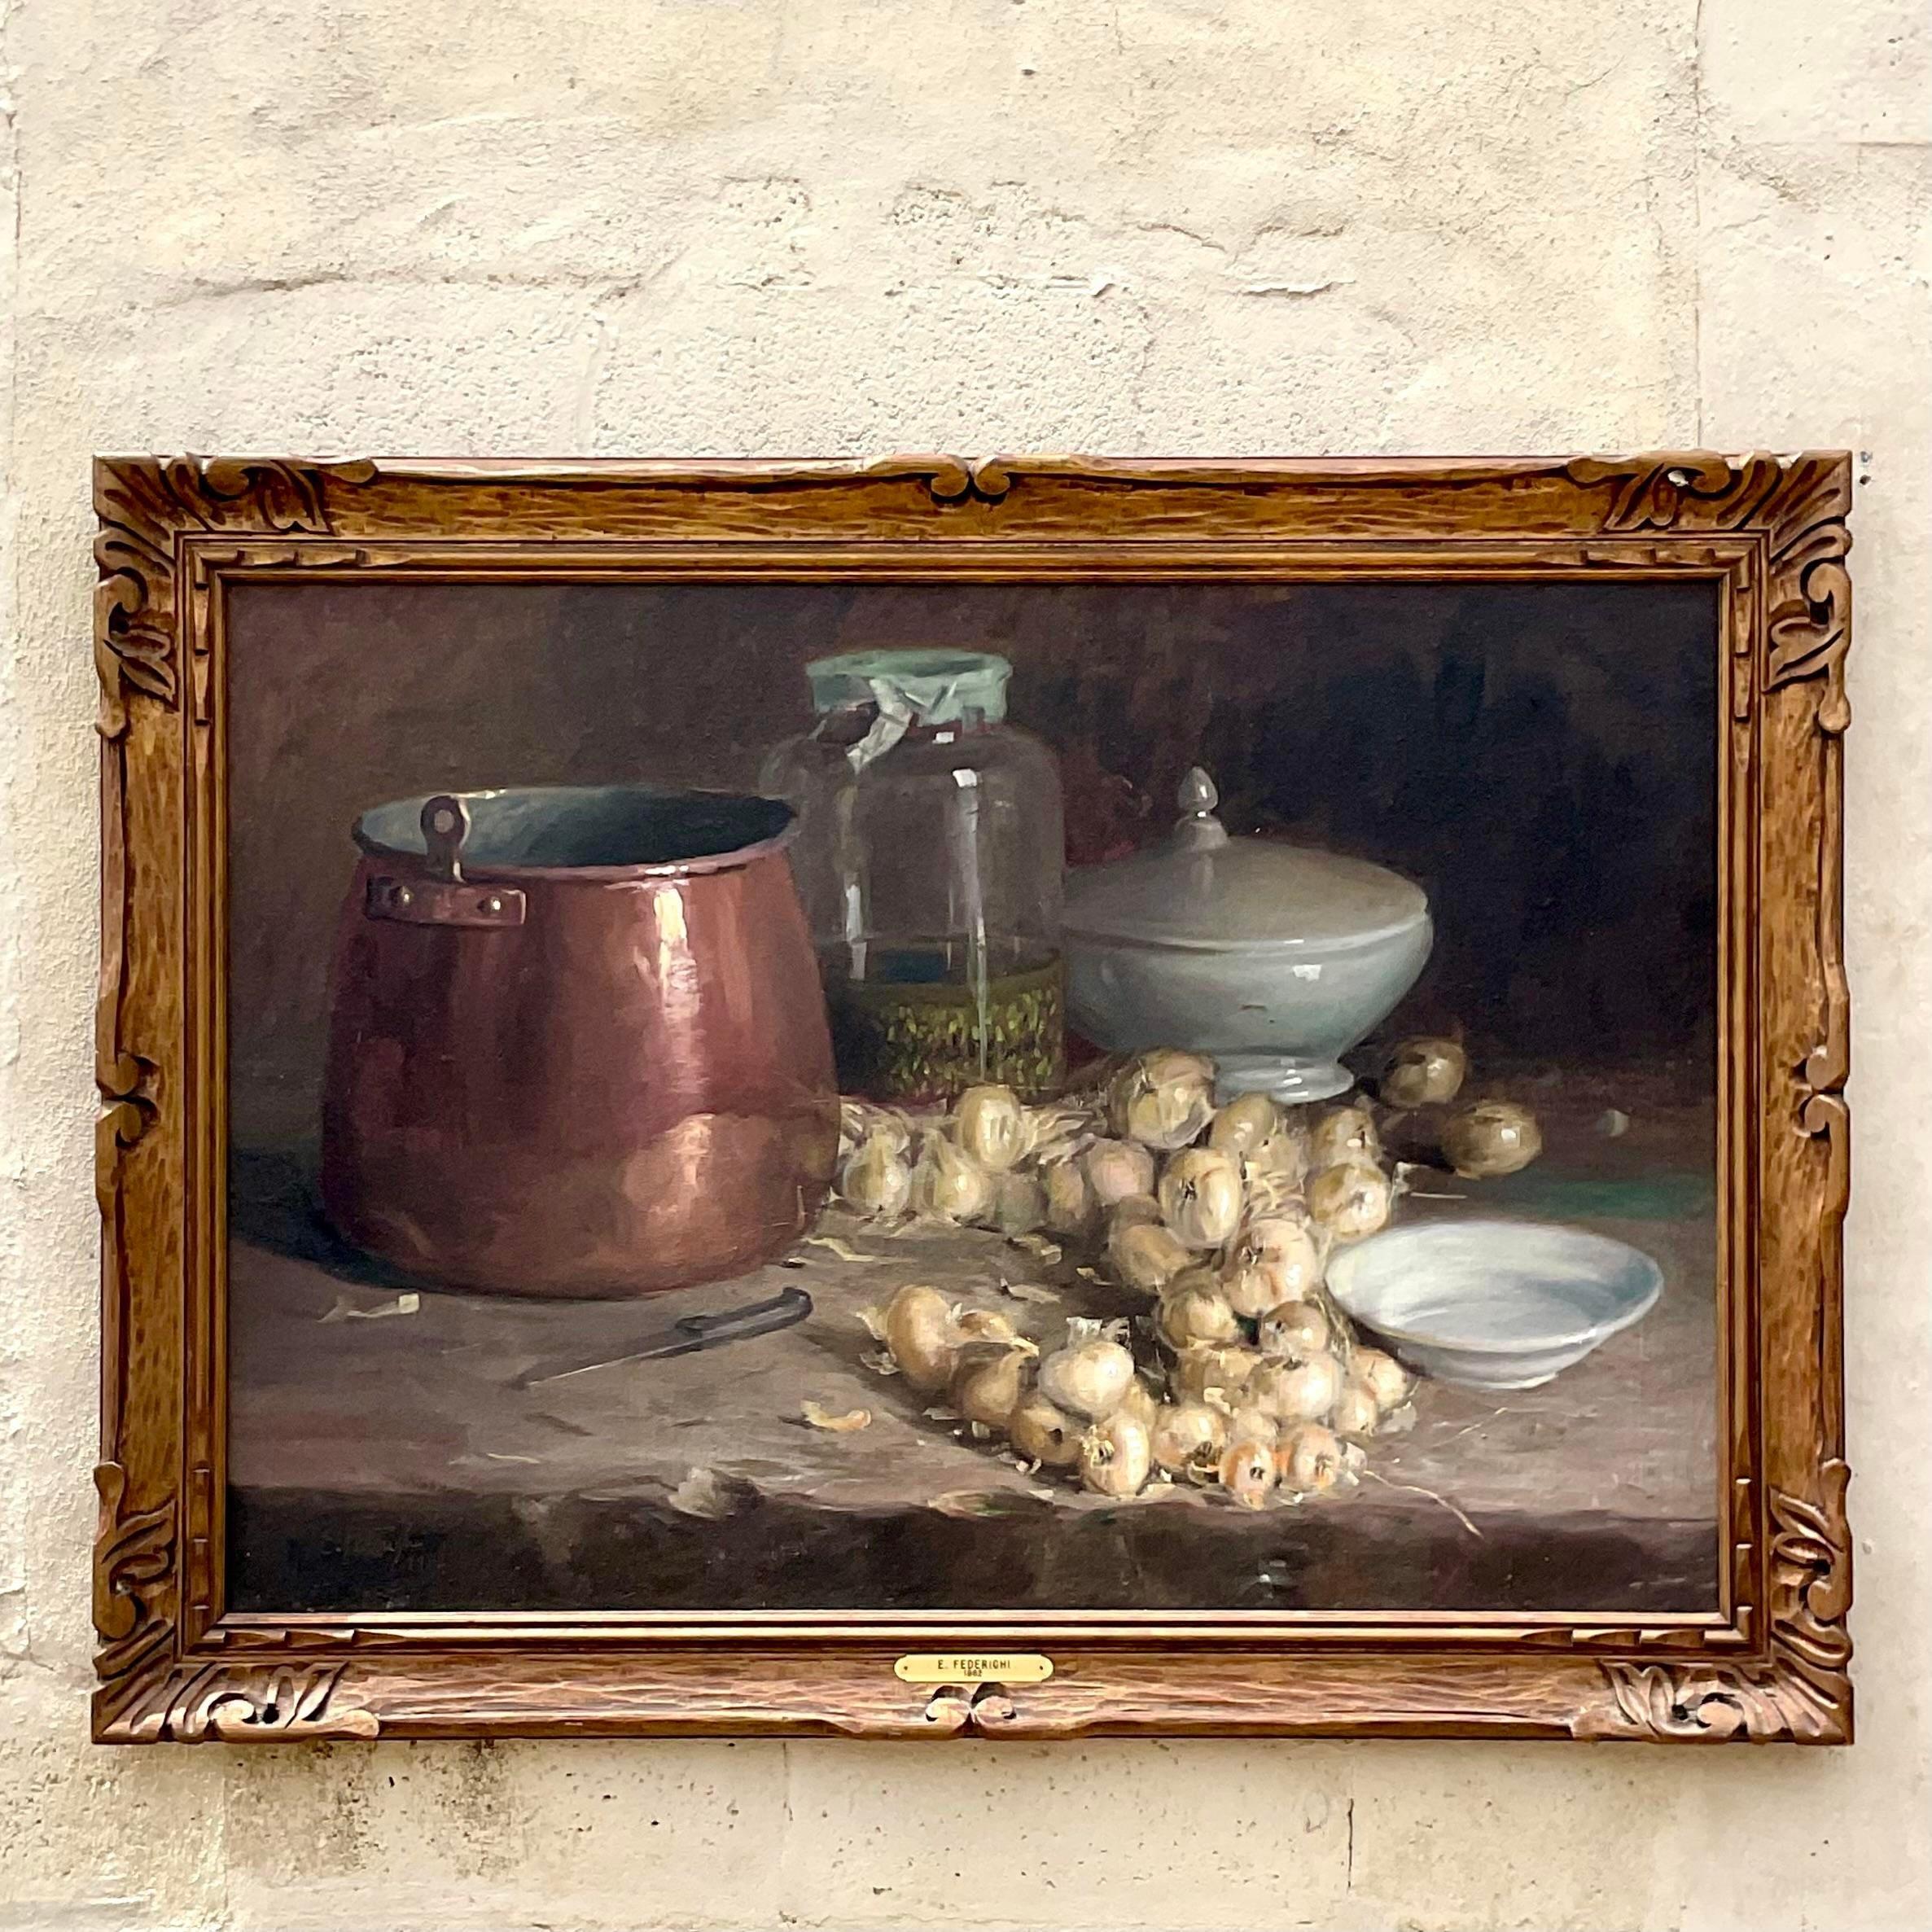 A striking vintage Boho original 1960s Italian oil on canvas. A chic still life in warm neutral tones with a subtle flash of green. Signed and dated by the artist. Acquired from a Palm Beach estate.